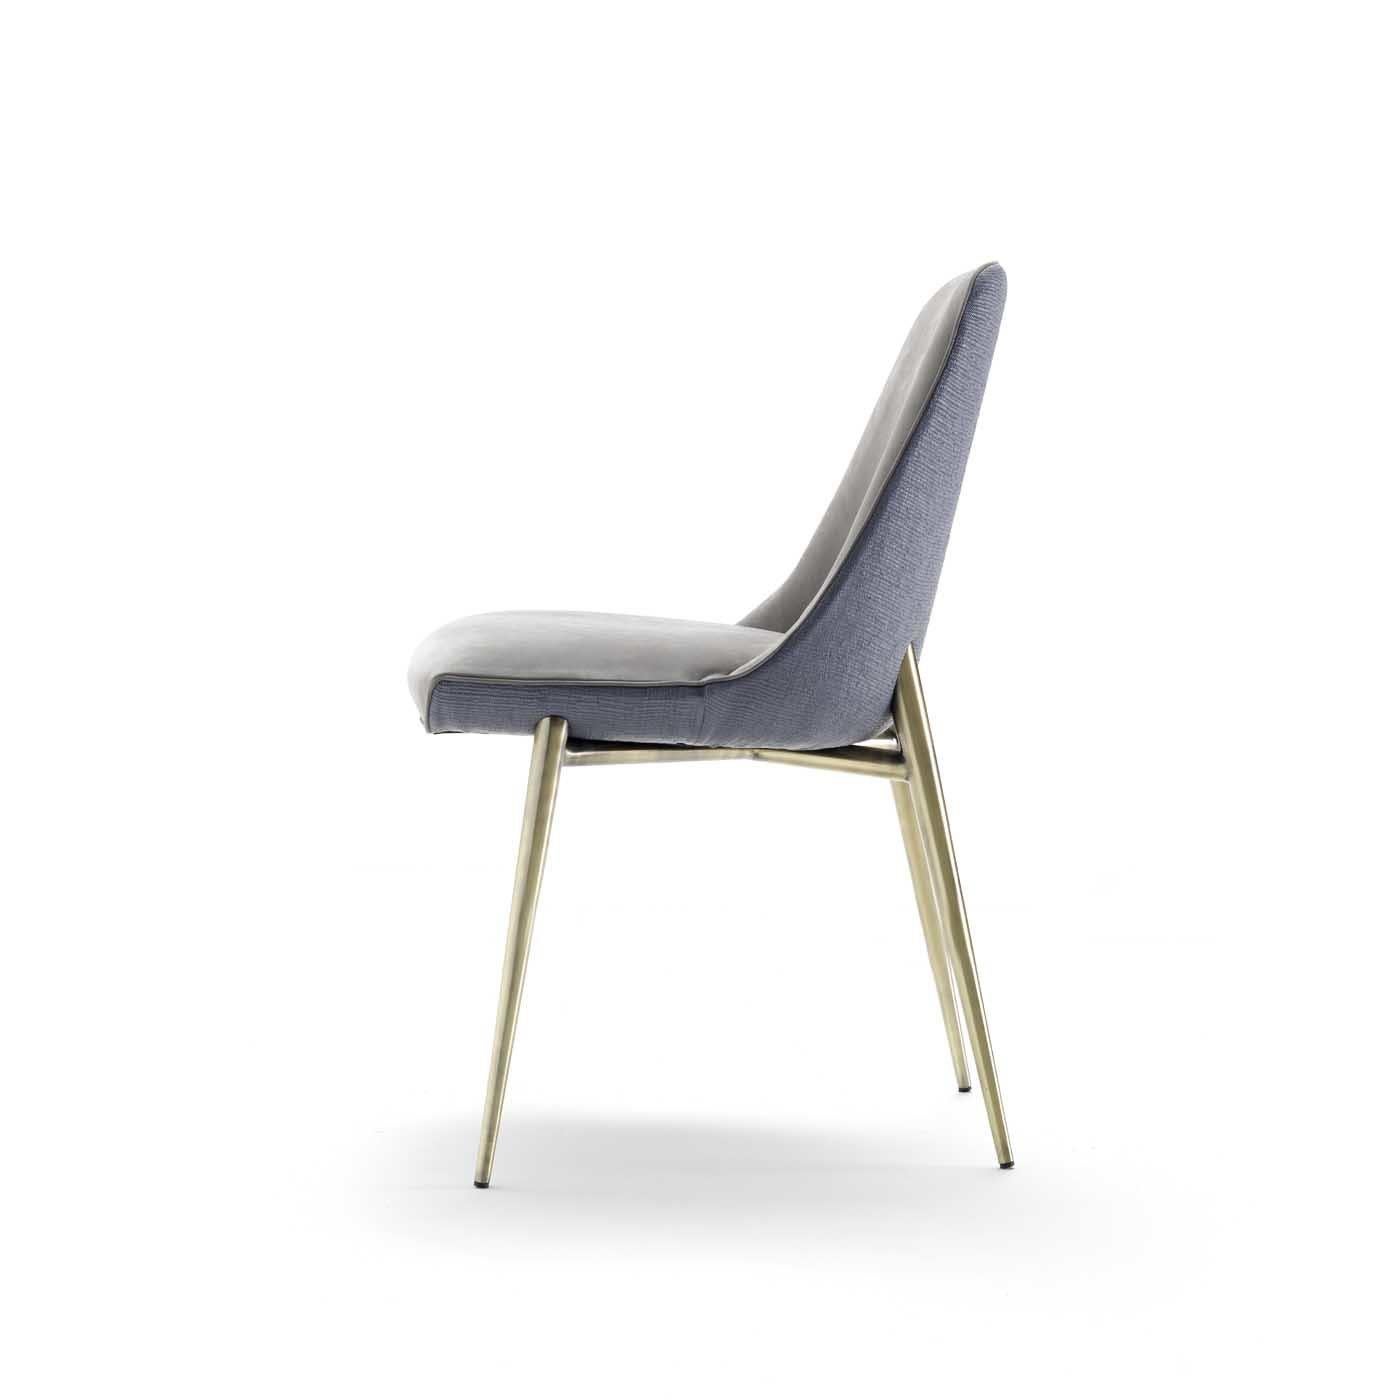 This elegant chair exudes mid-century elegance and a contemporary flair. It will be a stunning addition to a modern dining room or refined study. Its structure is crafted of metal with a satin brass finish and comprises four slanted legs and the